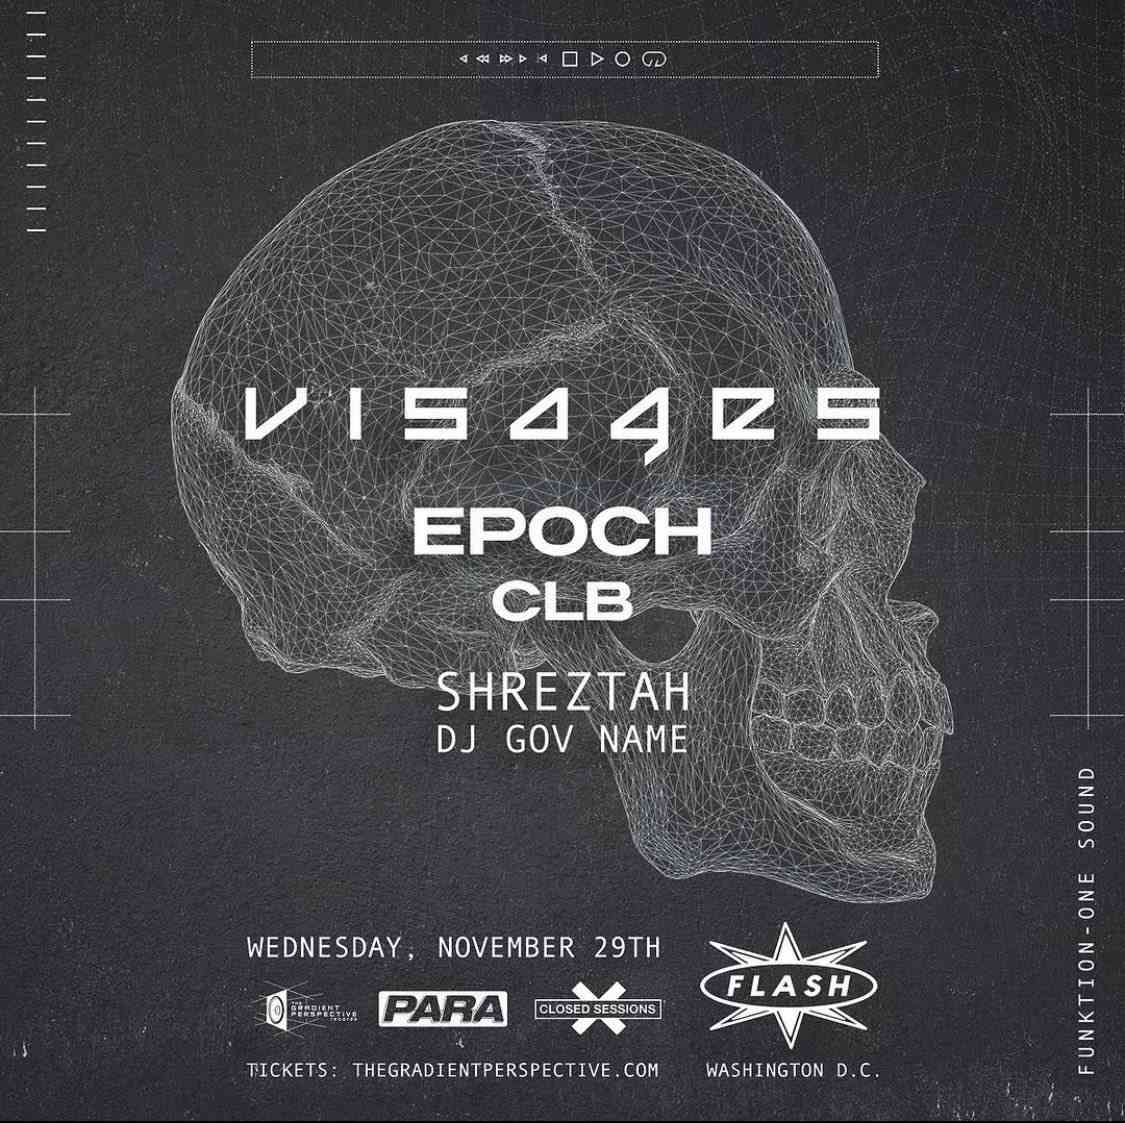 PARA PRESENTS, THE GRADIENT PERSPECTIVE & CLOSED SESSIONS PRESENTS: Visages - Epoch event flyer